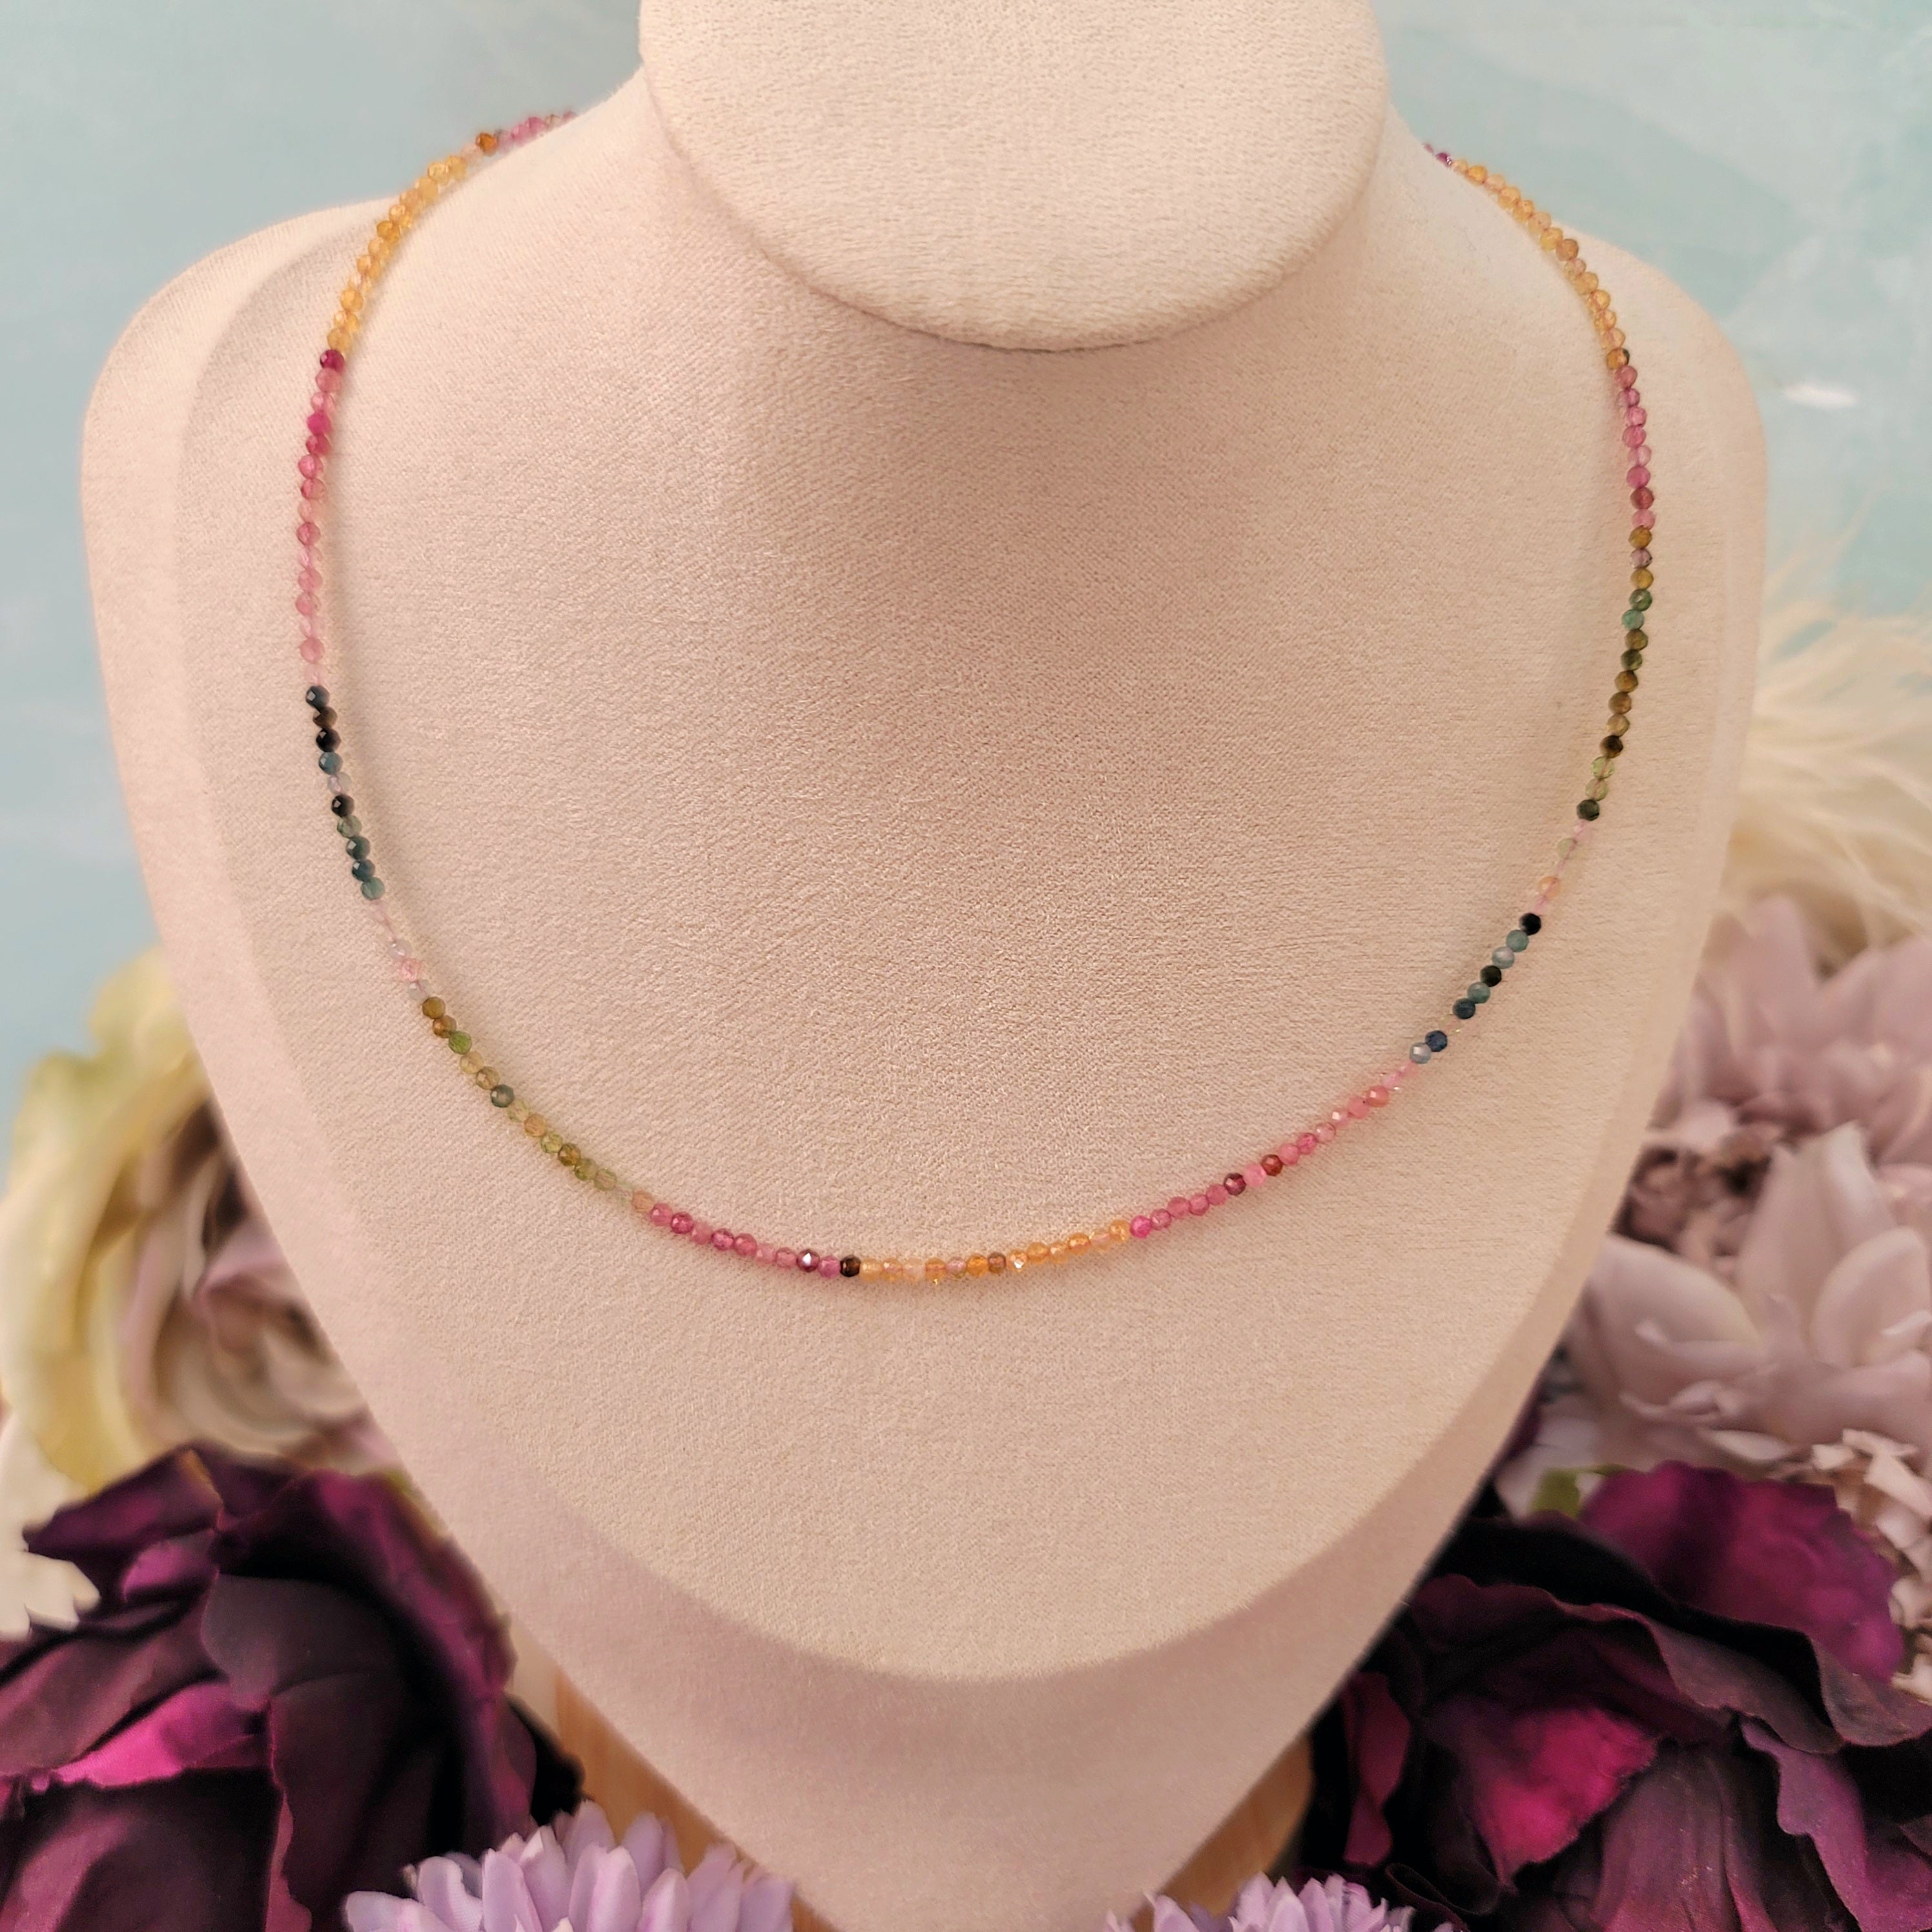 Tourmaline Multi Micro Faceted Waterfall Choker/Layering Necklace for Heart Healing and Joy